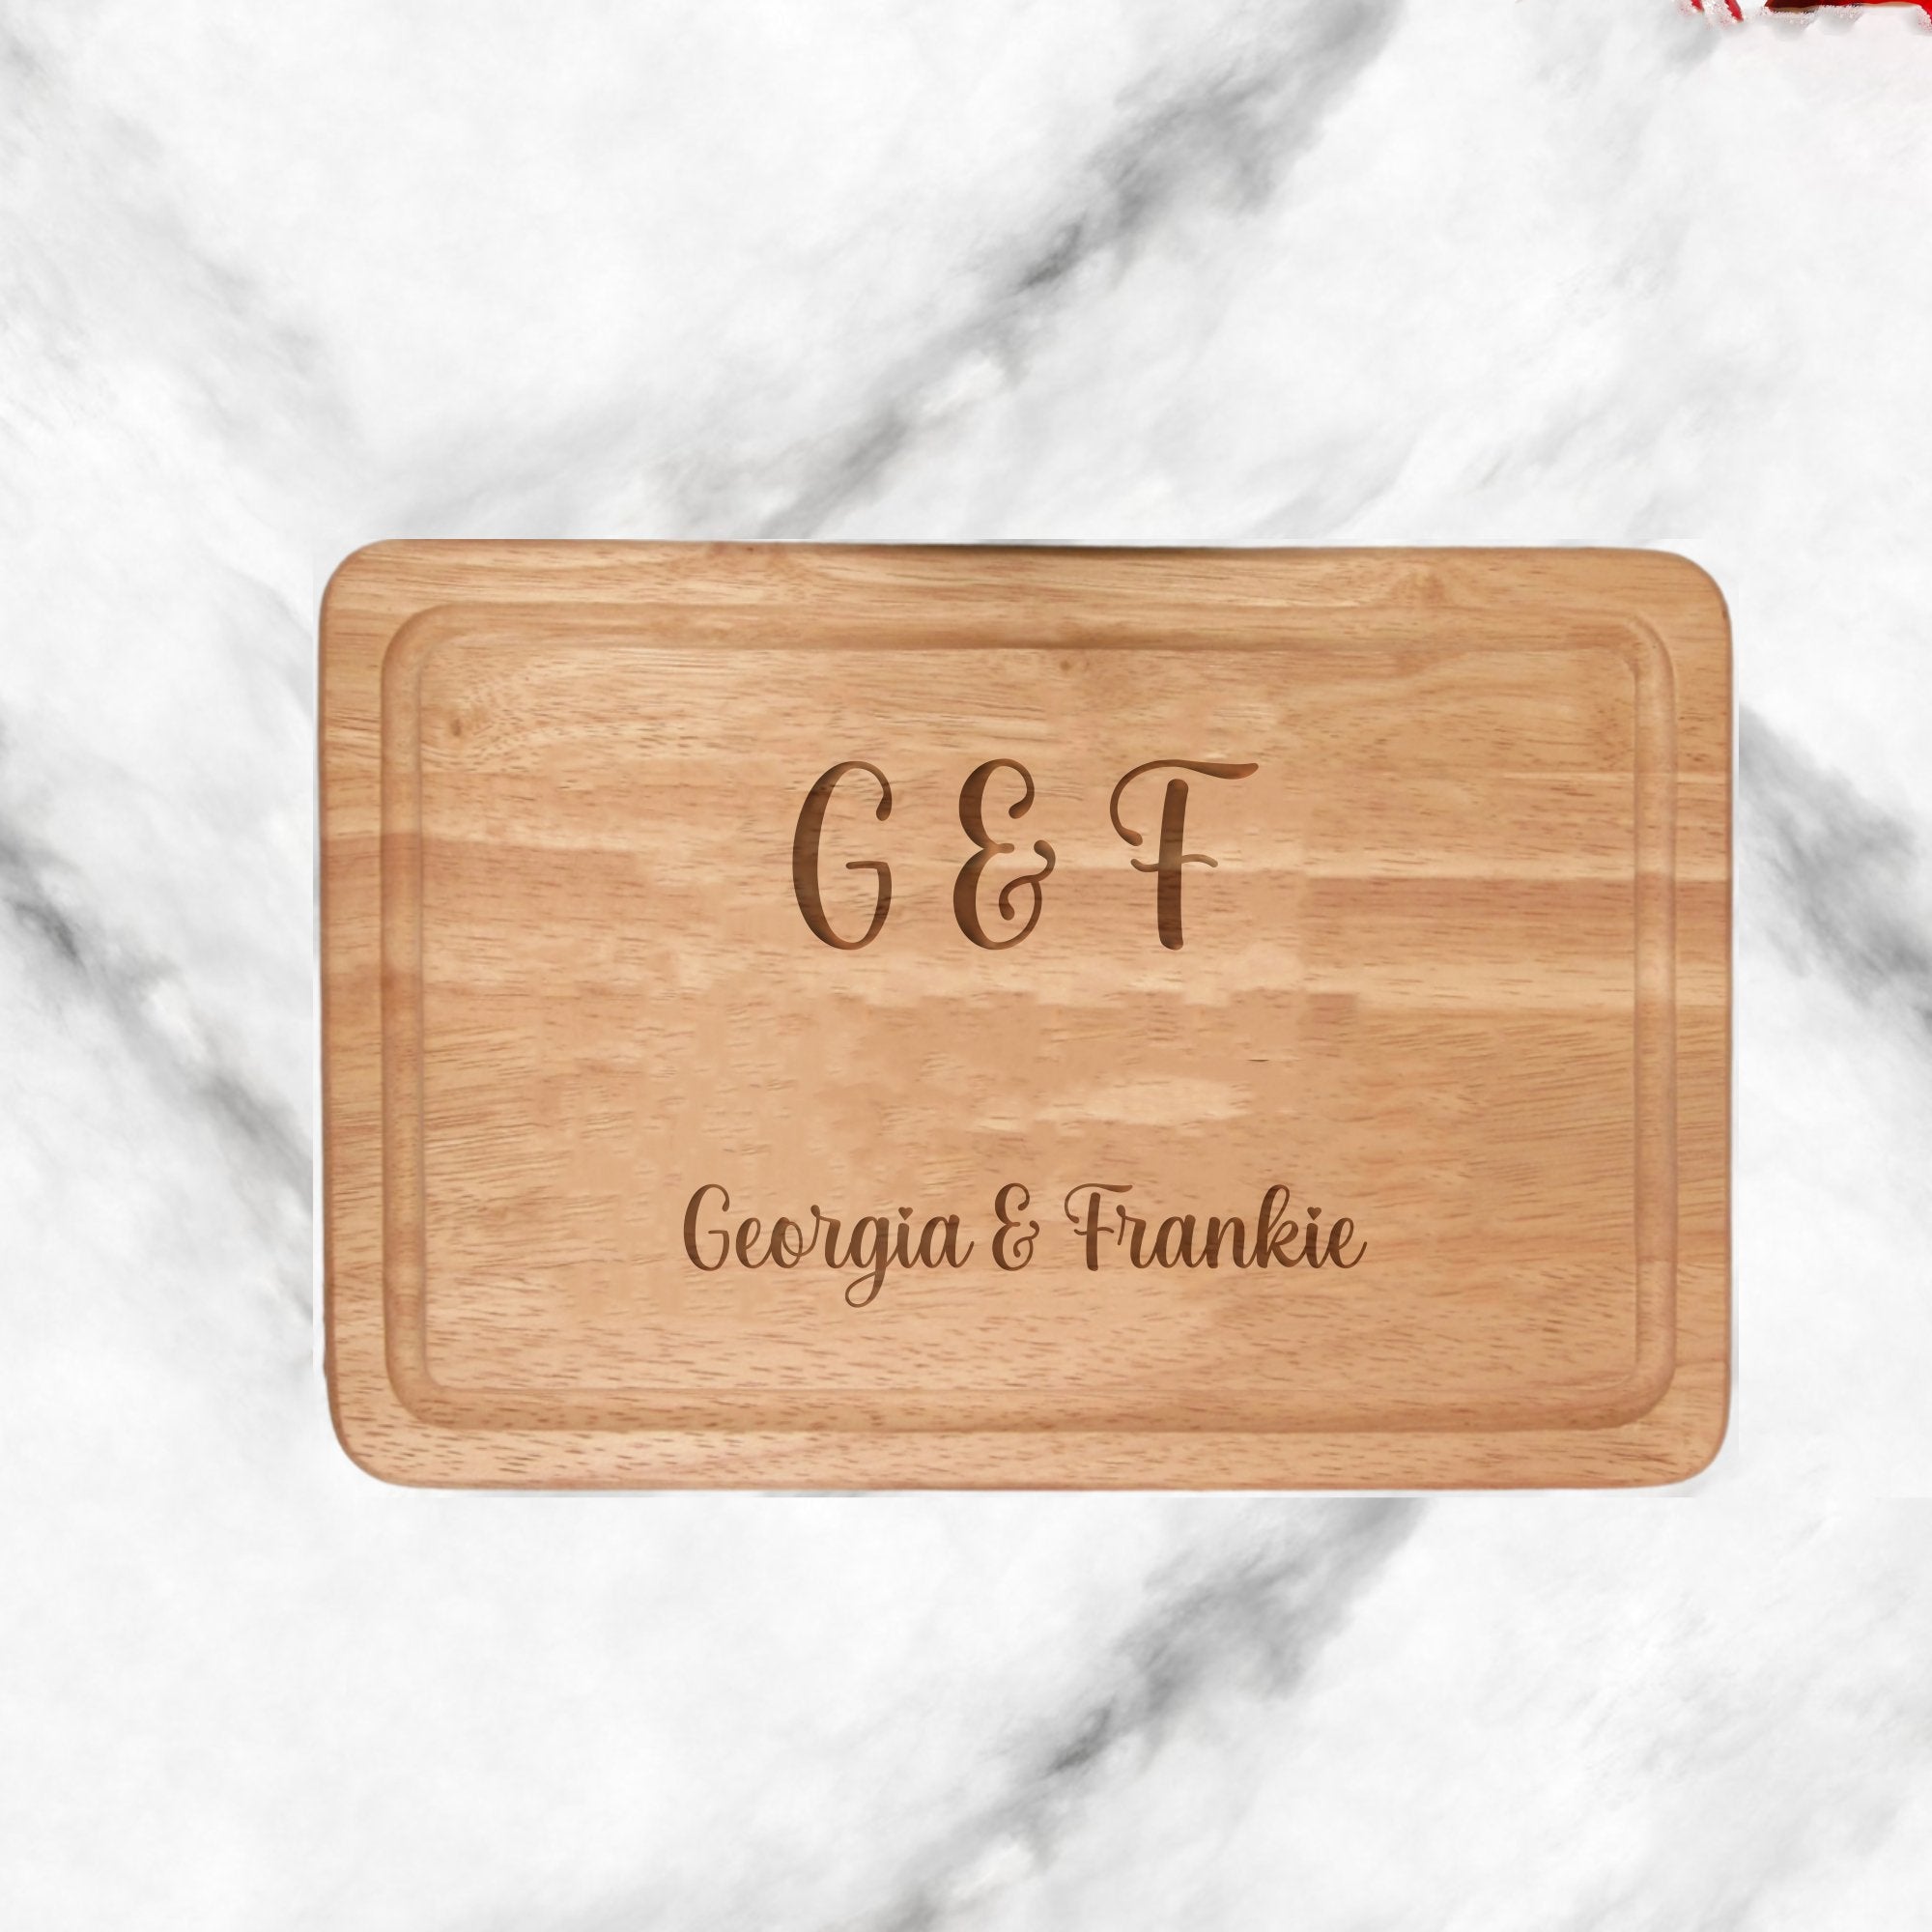 Description: A 300mmX200mm personalised wooden chopping board, meticulously engraved with refined initials and names. Crafted from durable, high-quality wood, this kitchen essential adds a personalised touch to cooking spaces. Ideal for special occasions or as a unique gift. Not dishwasher safe; hand wash only.